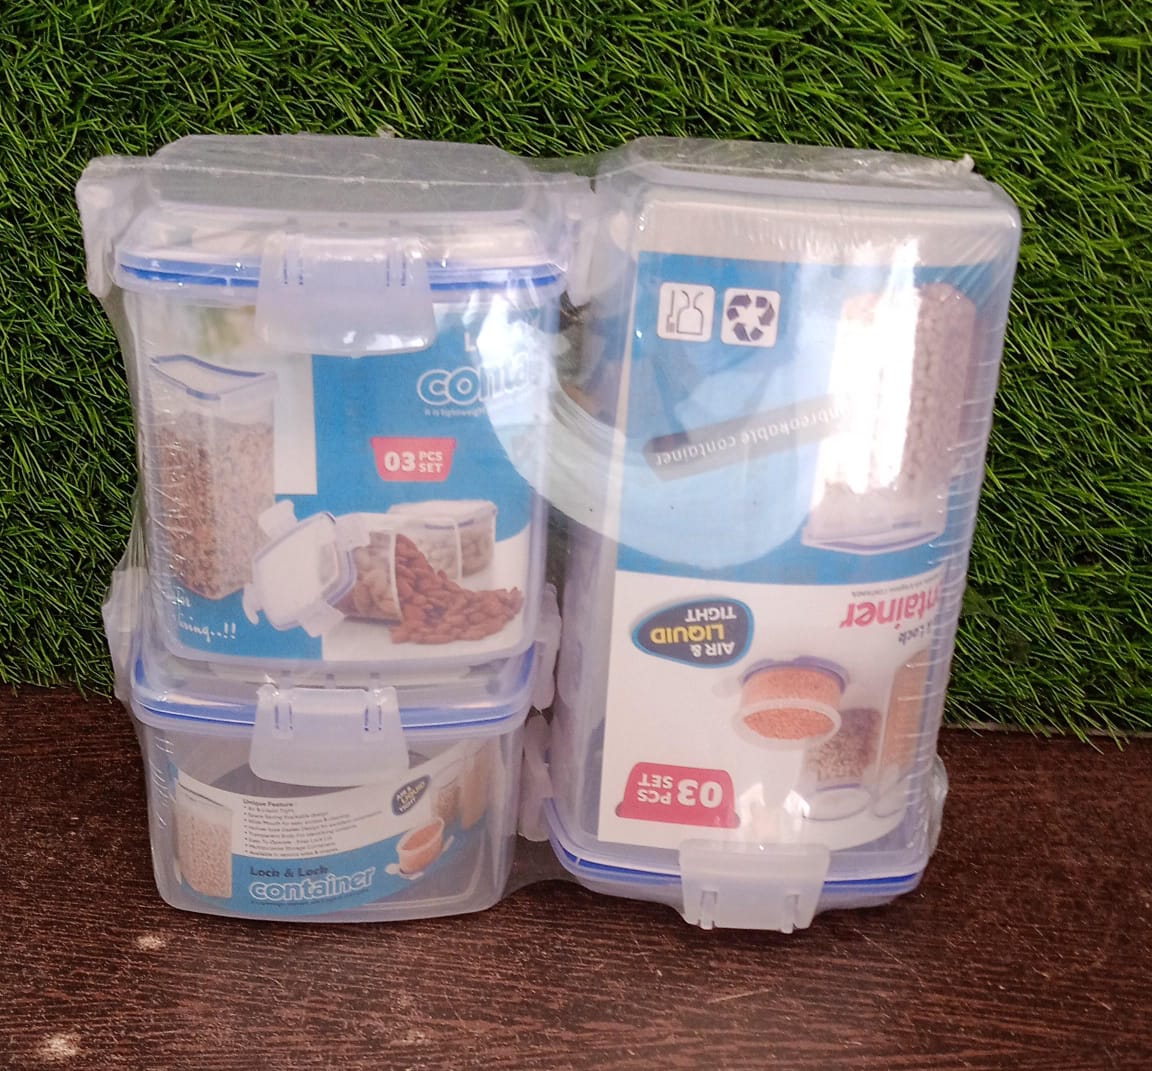 5827 Rectangle ABS Airtight Food Storage Containers with Leak Proof Locking Lid Storage container set of 3 Pc (Approx Capacity 500ml,1000ml,1500ml, Transparent)